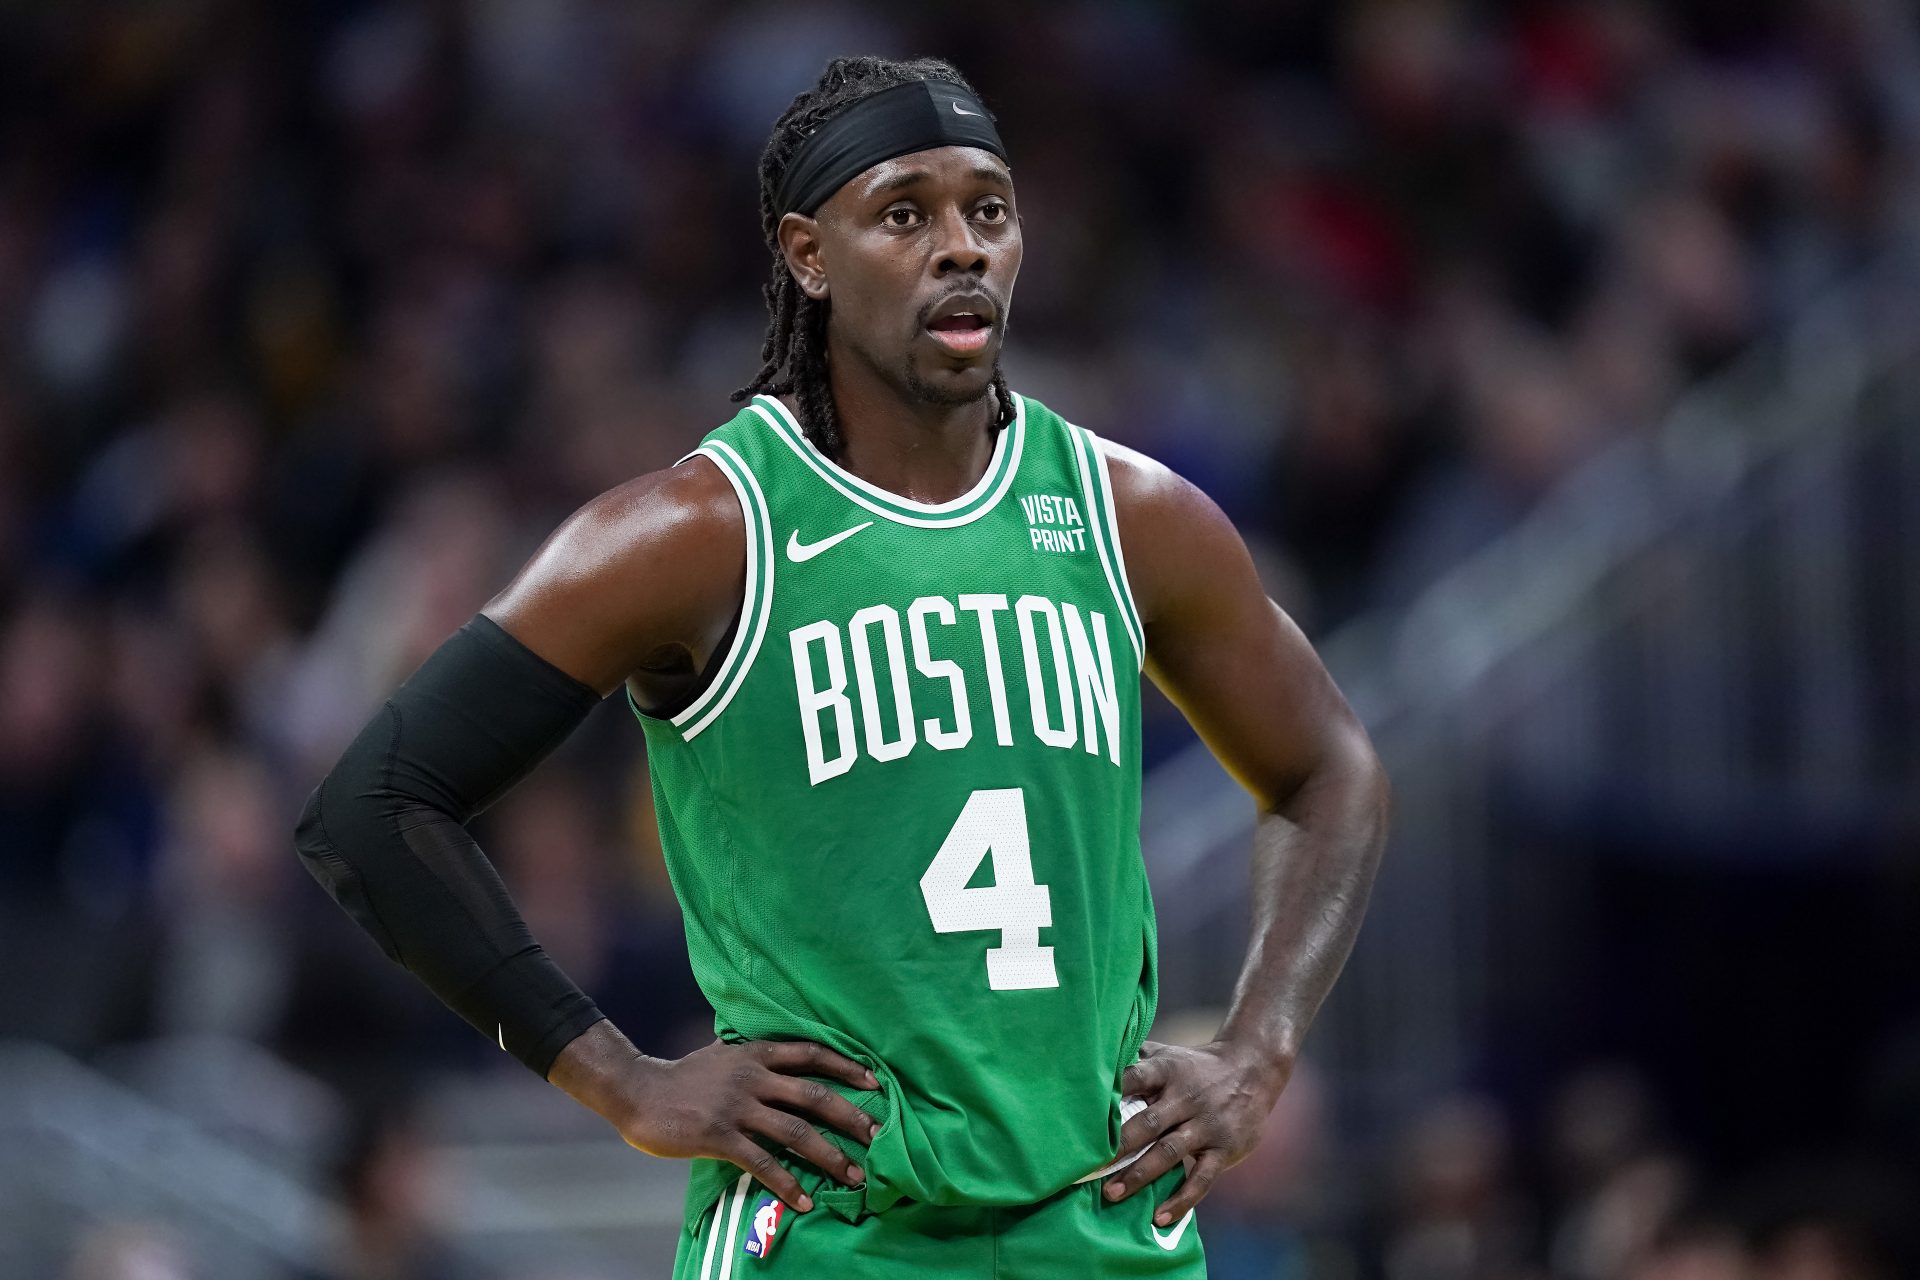 Is Jrue Holiday now a lock for The Basketball Hall of Fame?